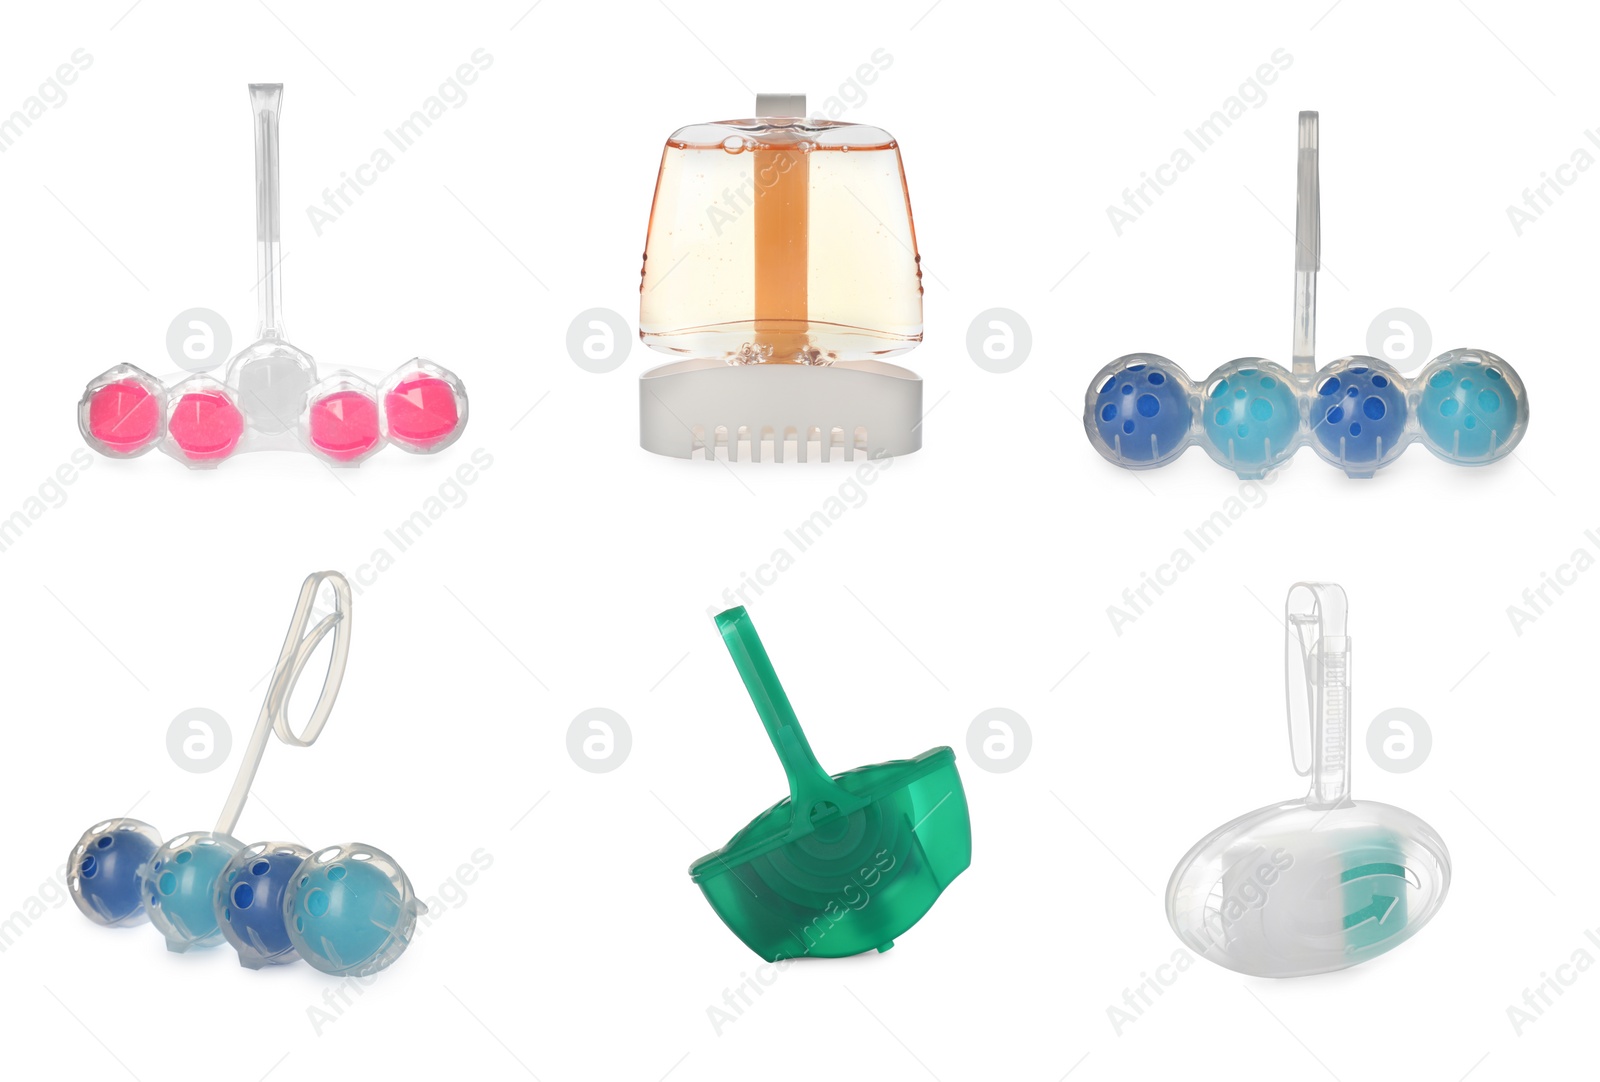 Image of Set with toilet rim blocks cleaner on white background